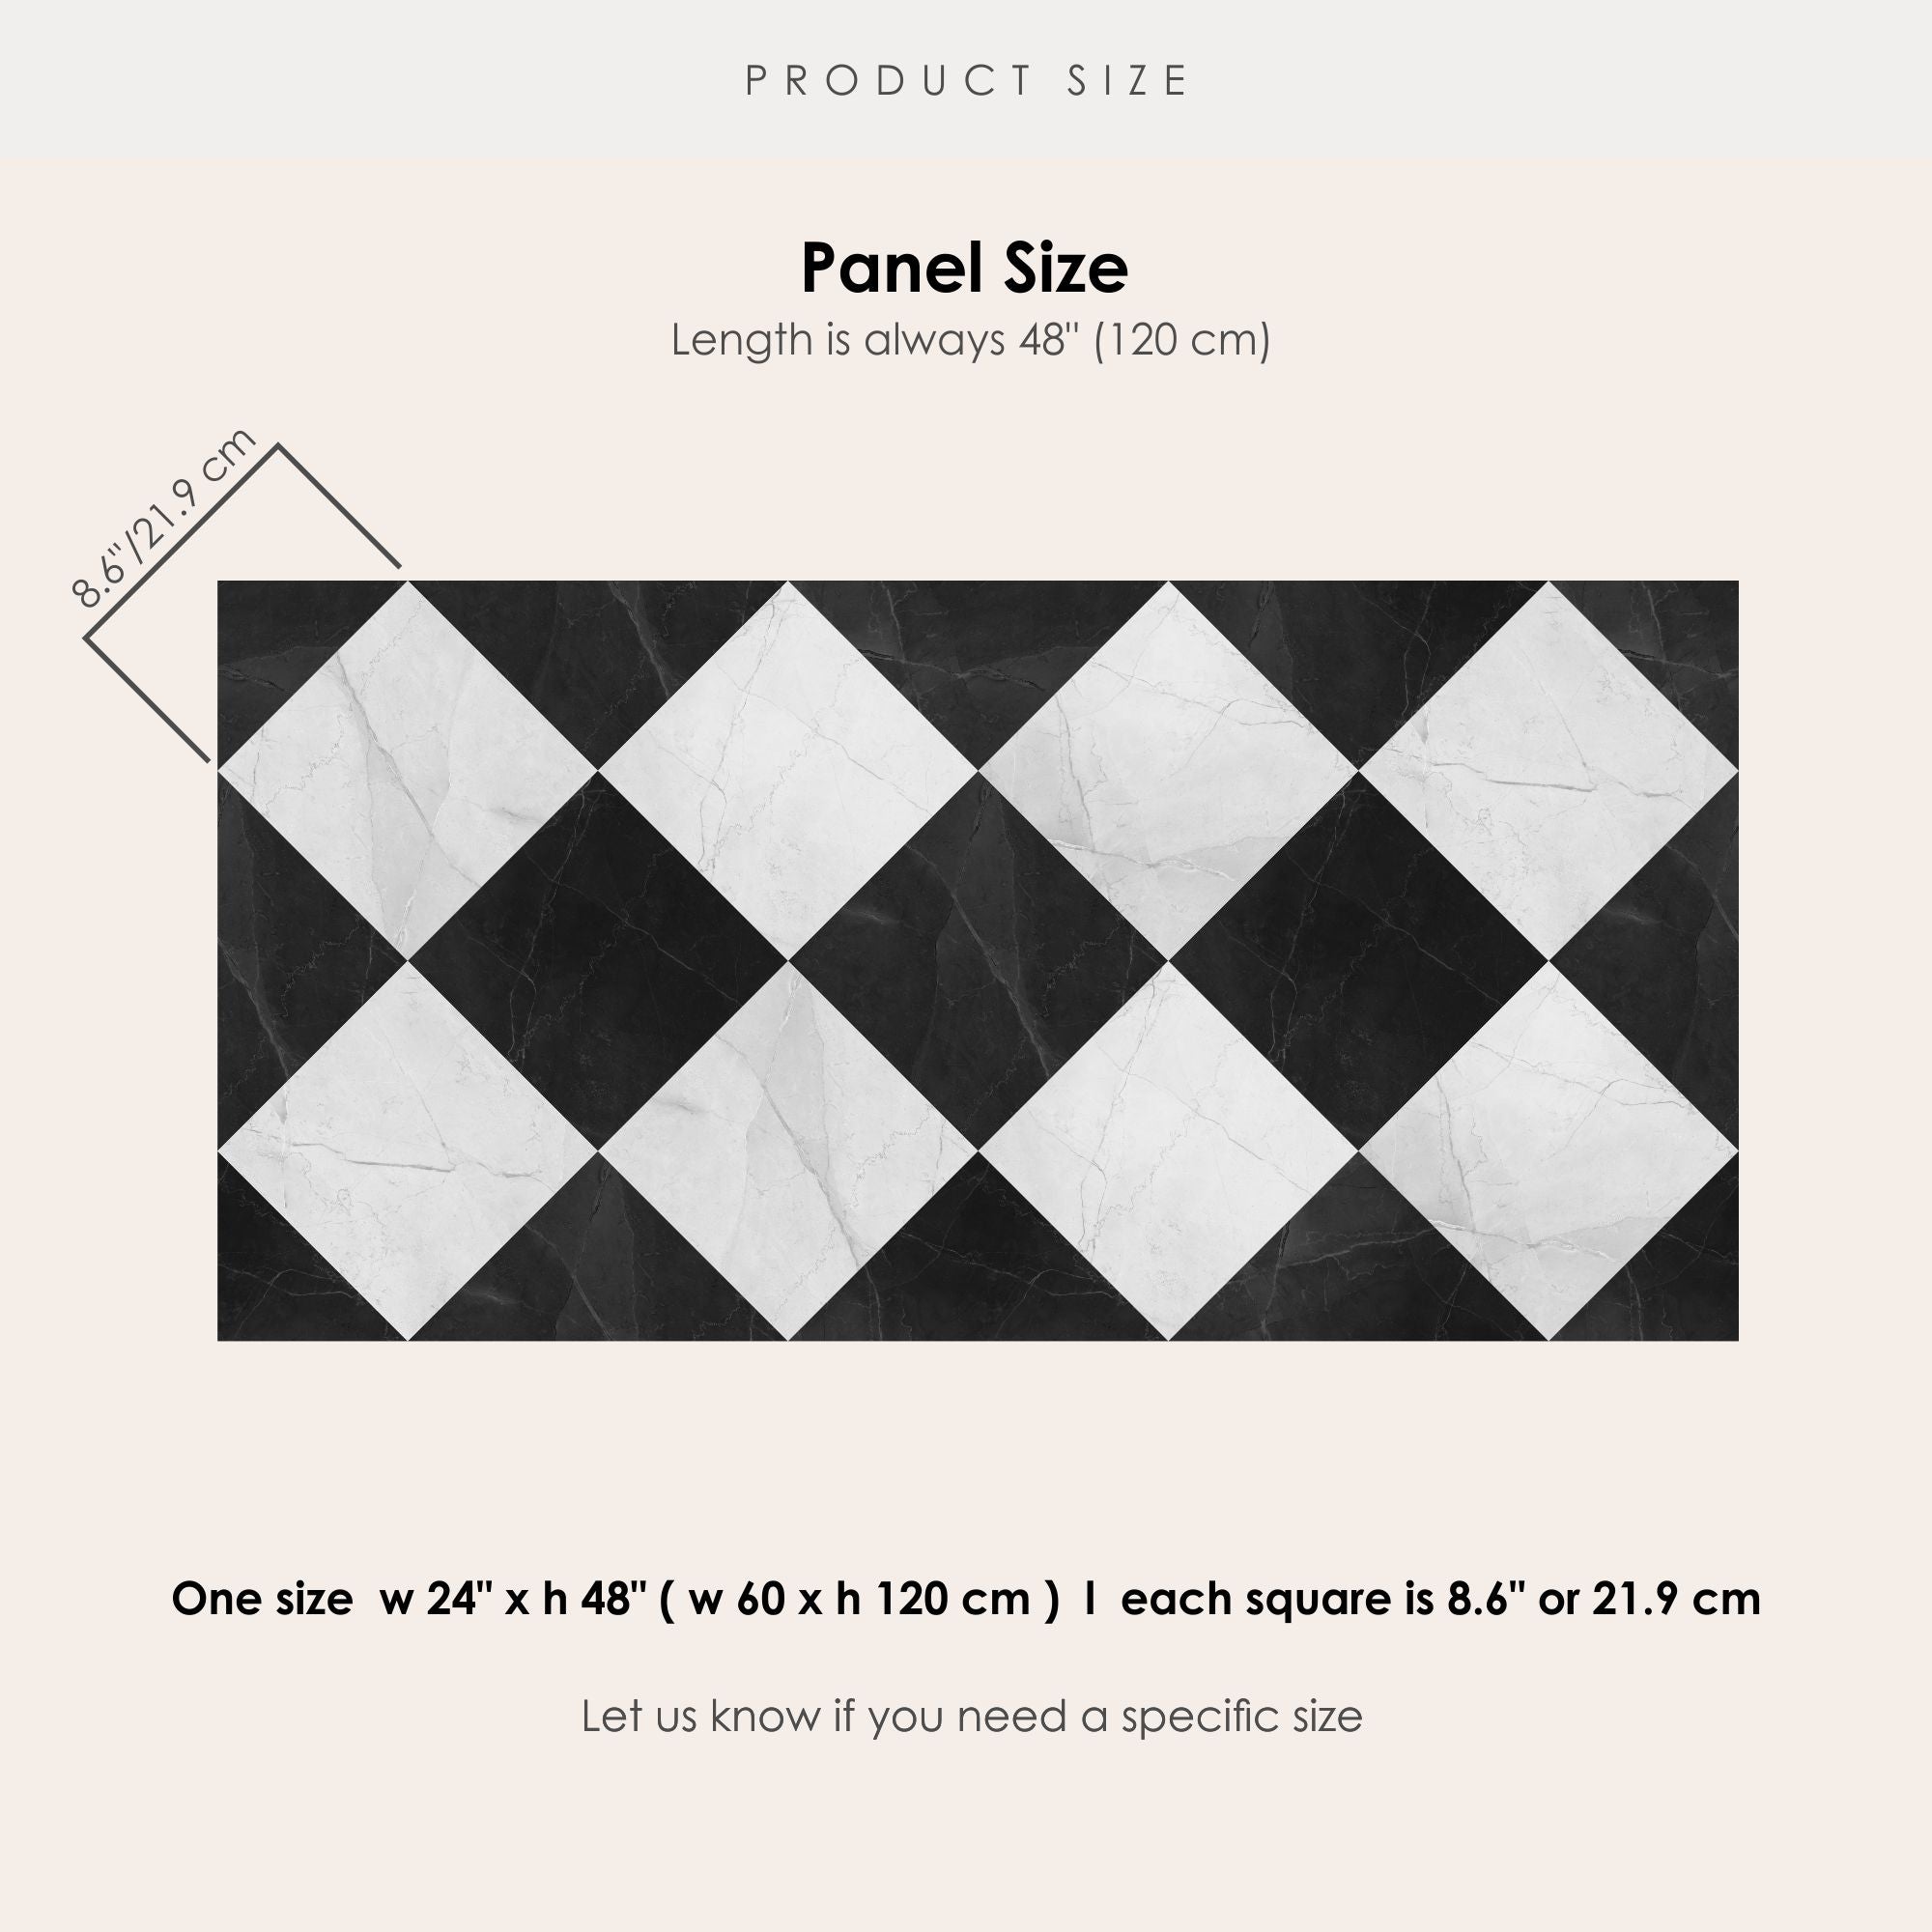 Checkerboard in Black and White Marble Tile Sticker